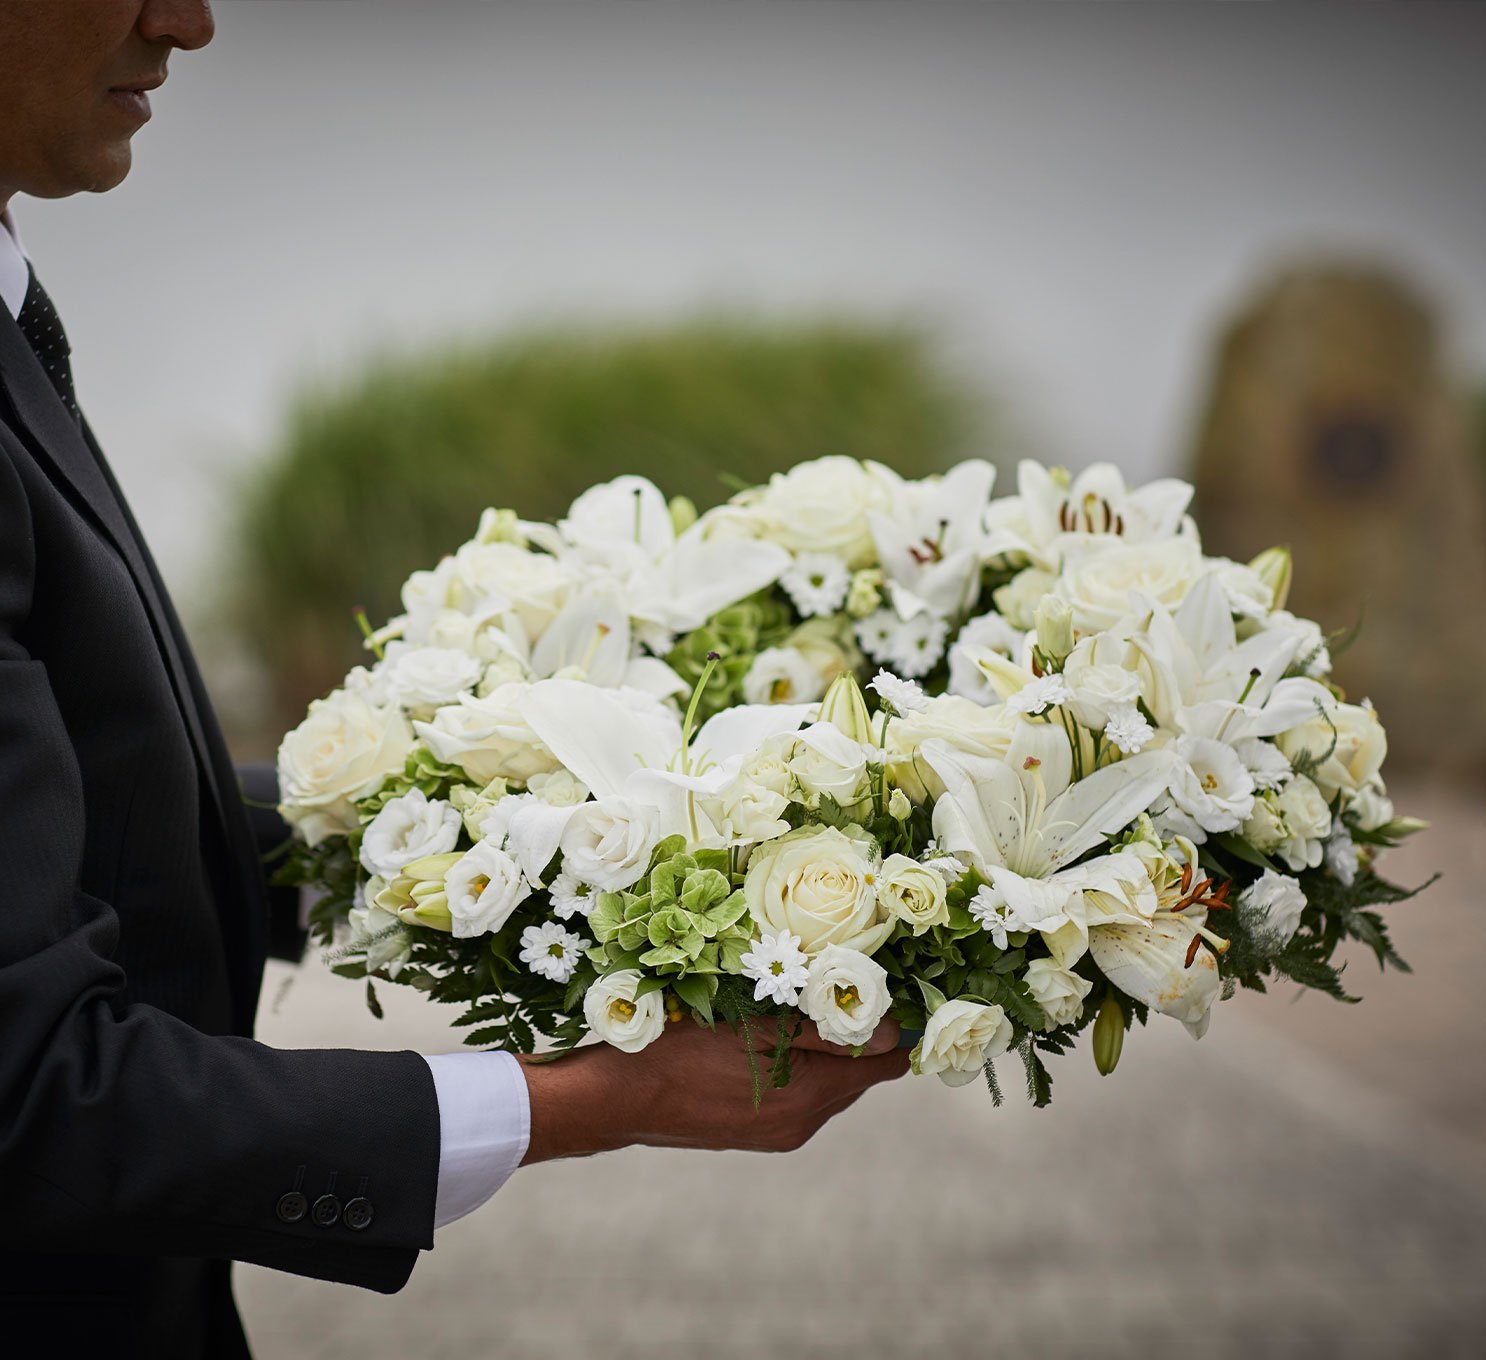 A funeral directors carries a wreath of white flowers